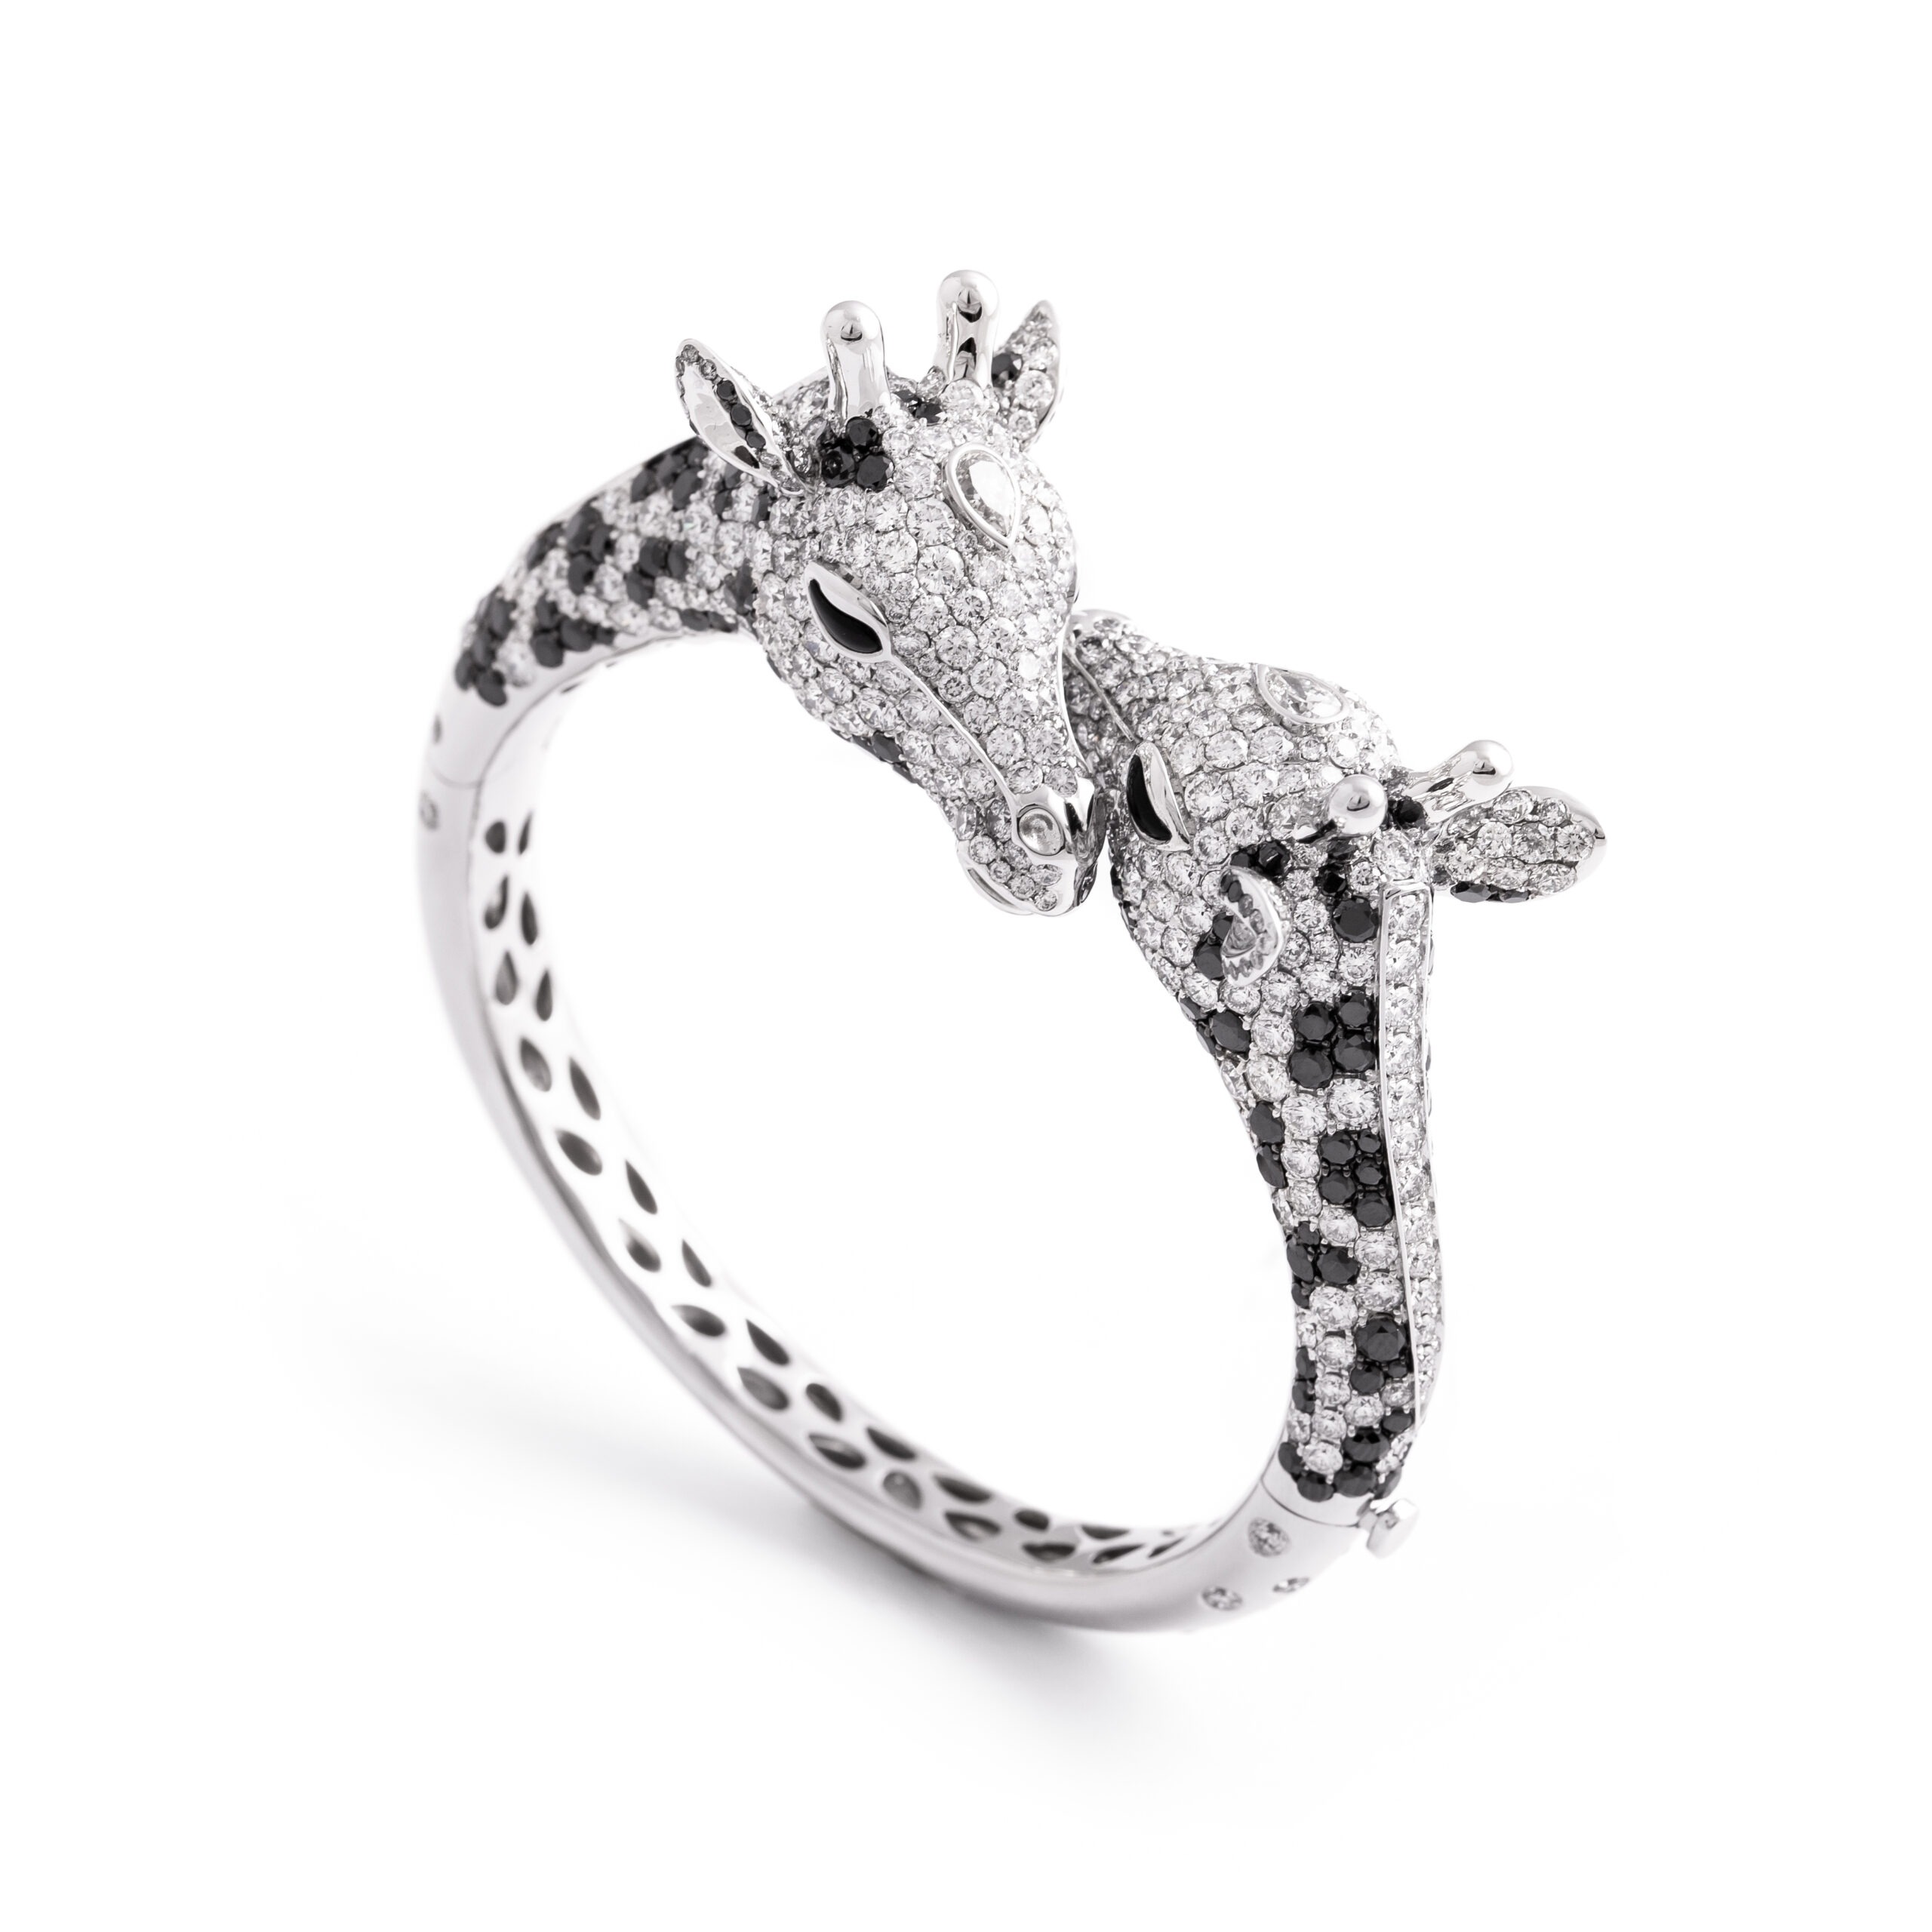 Giraffe bangle in 18kt white gold set with 553 diamonds 16.80 cts and 218 black diamonds 7.83 cts, 2 pear-shaped diamonds 0.55 cts and 4 onyx 0.44 cts              